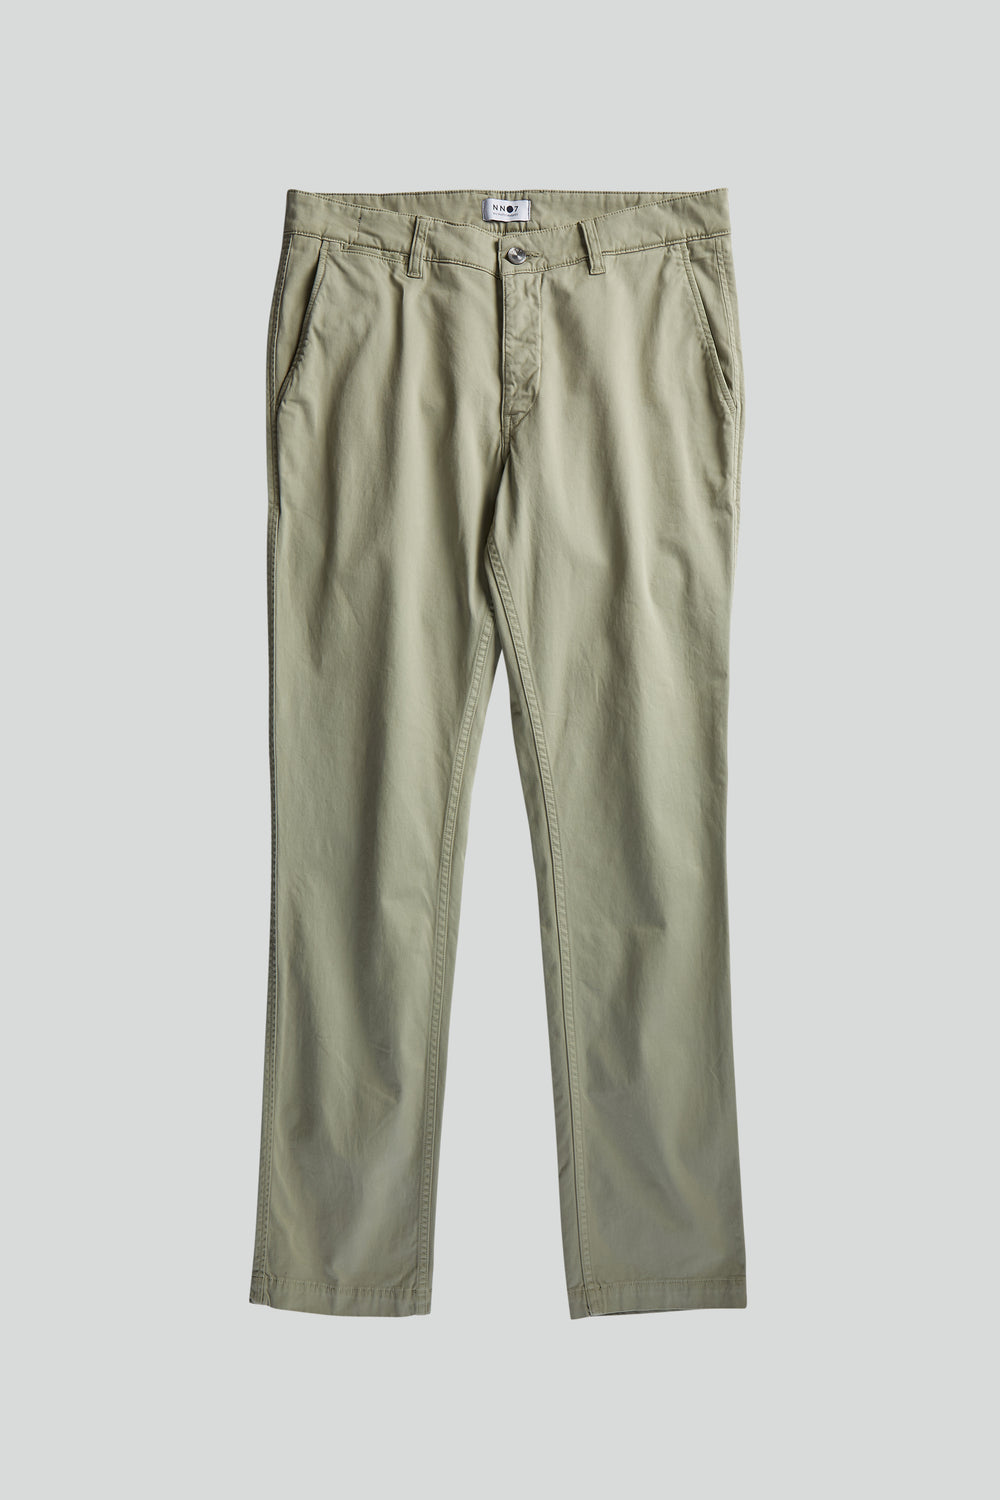 NN07 - Marco 1400 Classic Chino in Oil Green | Buster McGee